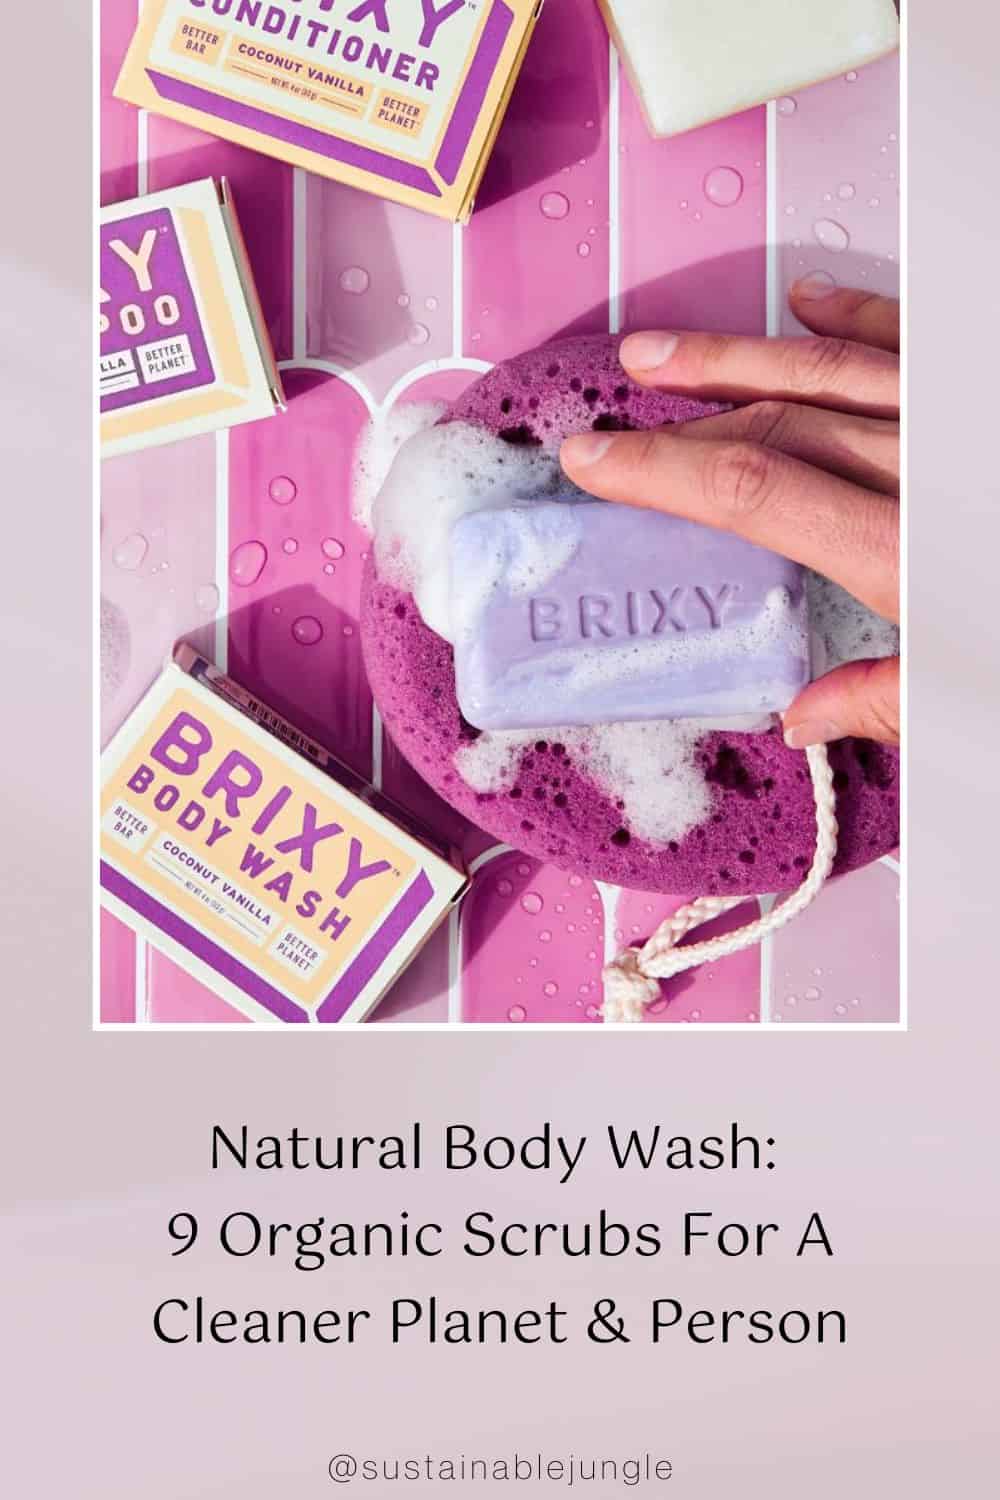 Natural Body Wash: 9 Organic Scrubs For A Cleaner Planet & Person Image by Brixy #naturalbodywash #bestnaturalbodywash #organicbodywash #organicbodywashbrands #bestorganicbodywash #allnaturalbodywash #sustainablejungle